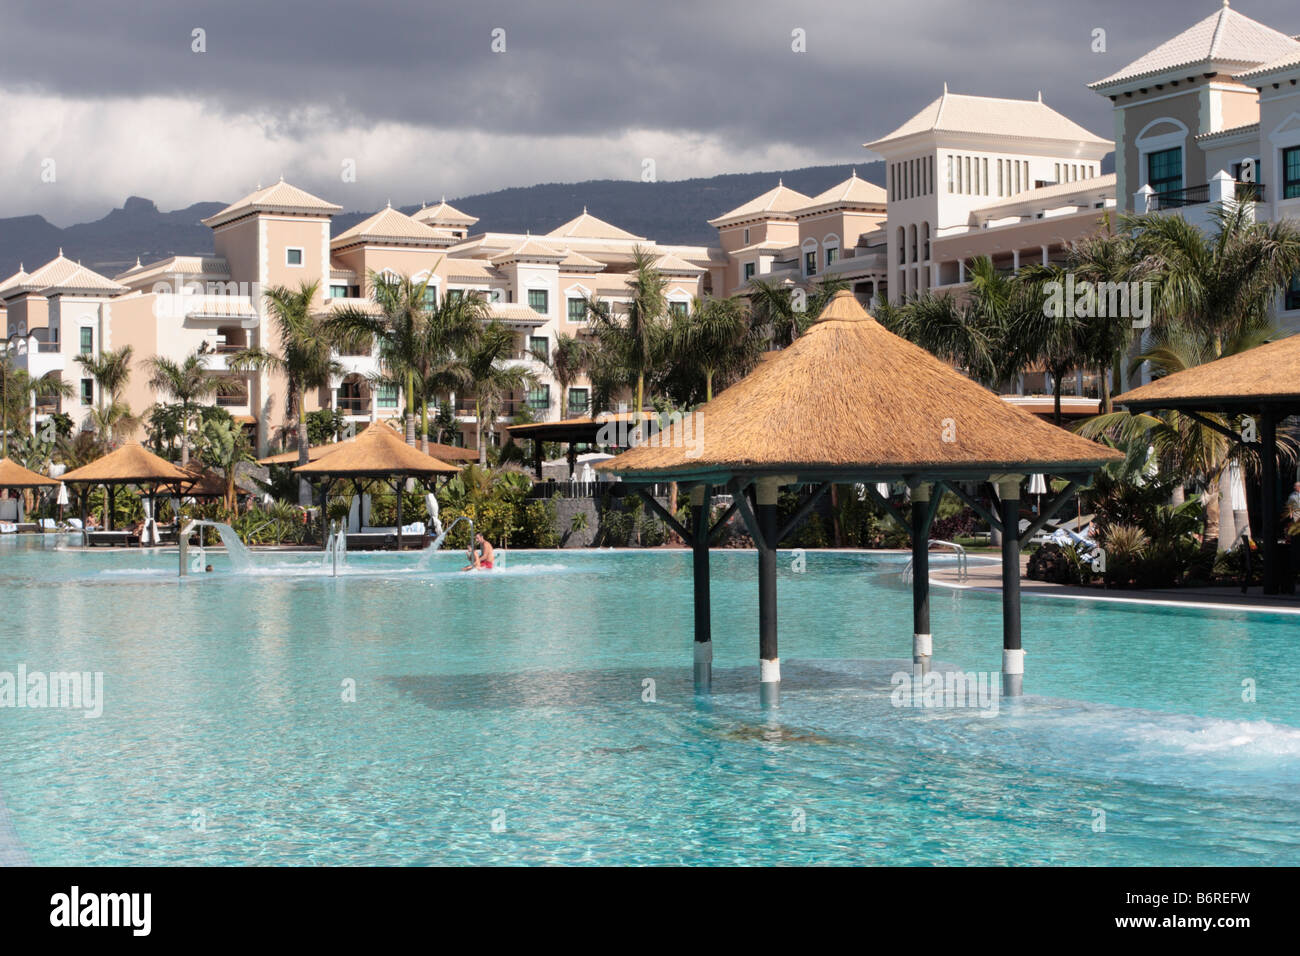 The pool area of the Sol Melia hotel Gran Palacio de Isora in sunshine whilst storm clouds appear over the mountains Stock Photo